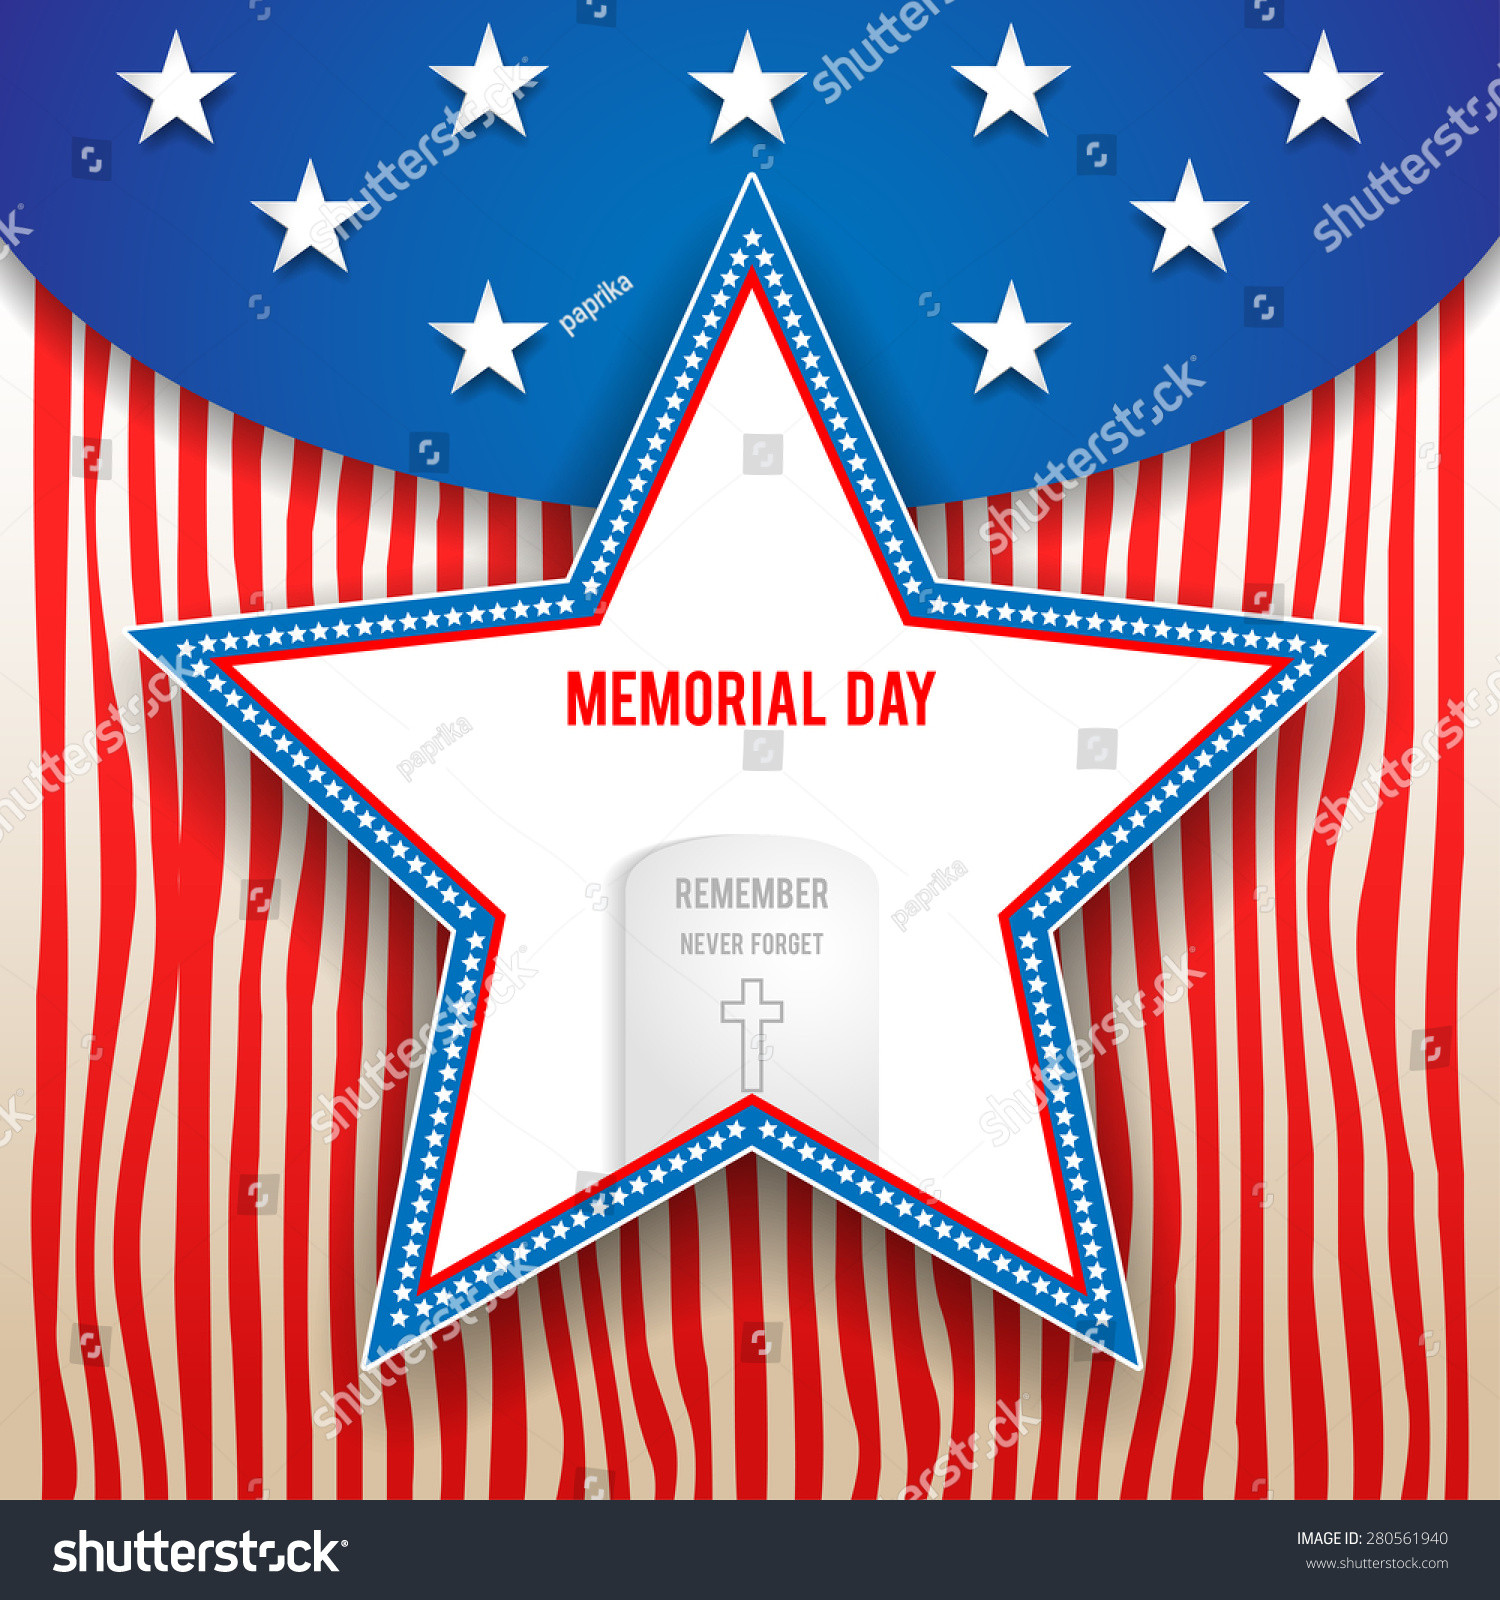 Memorial Day Design
 Memorial Day Design Striped Background Holiday